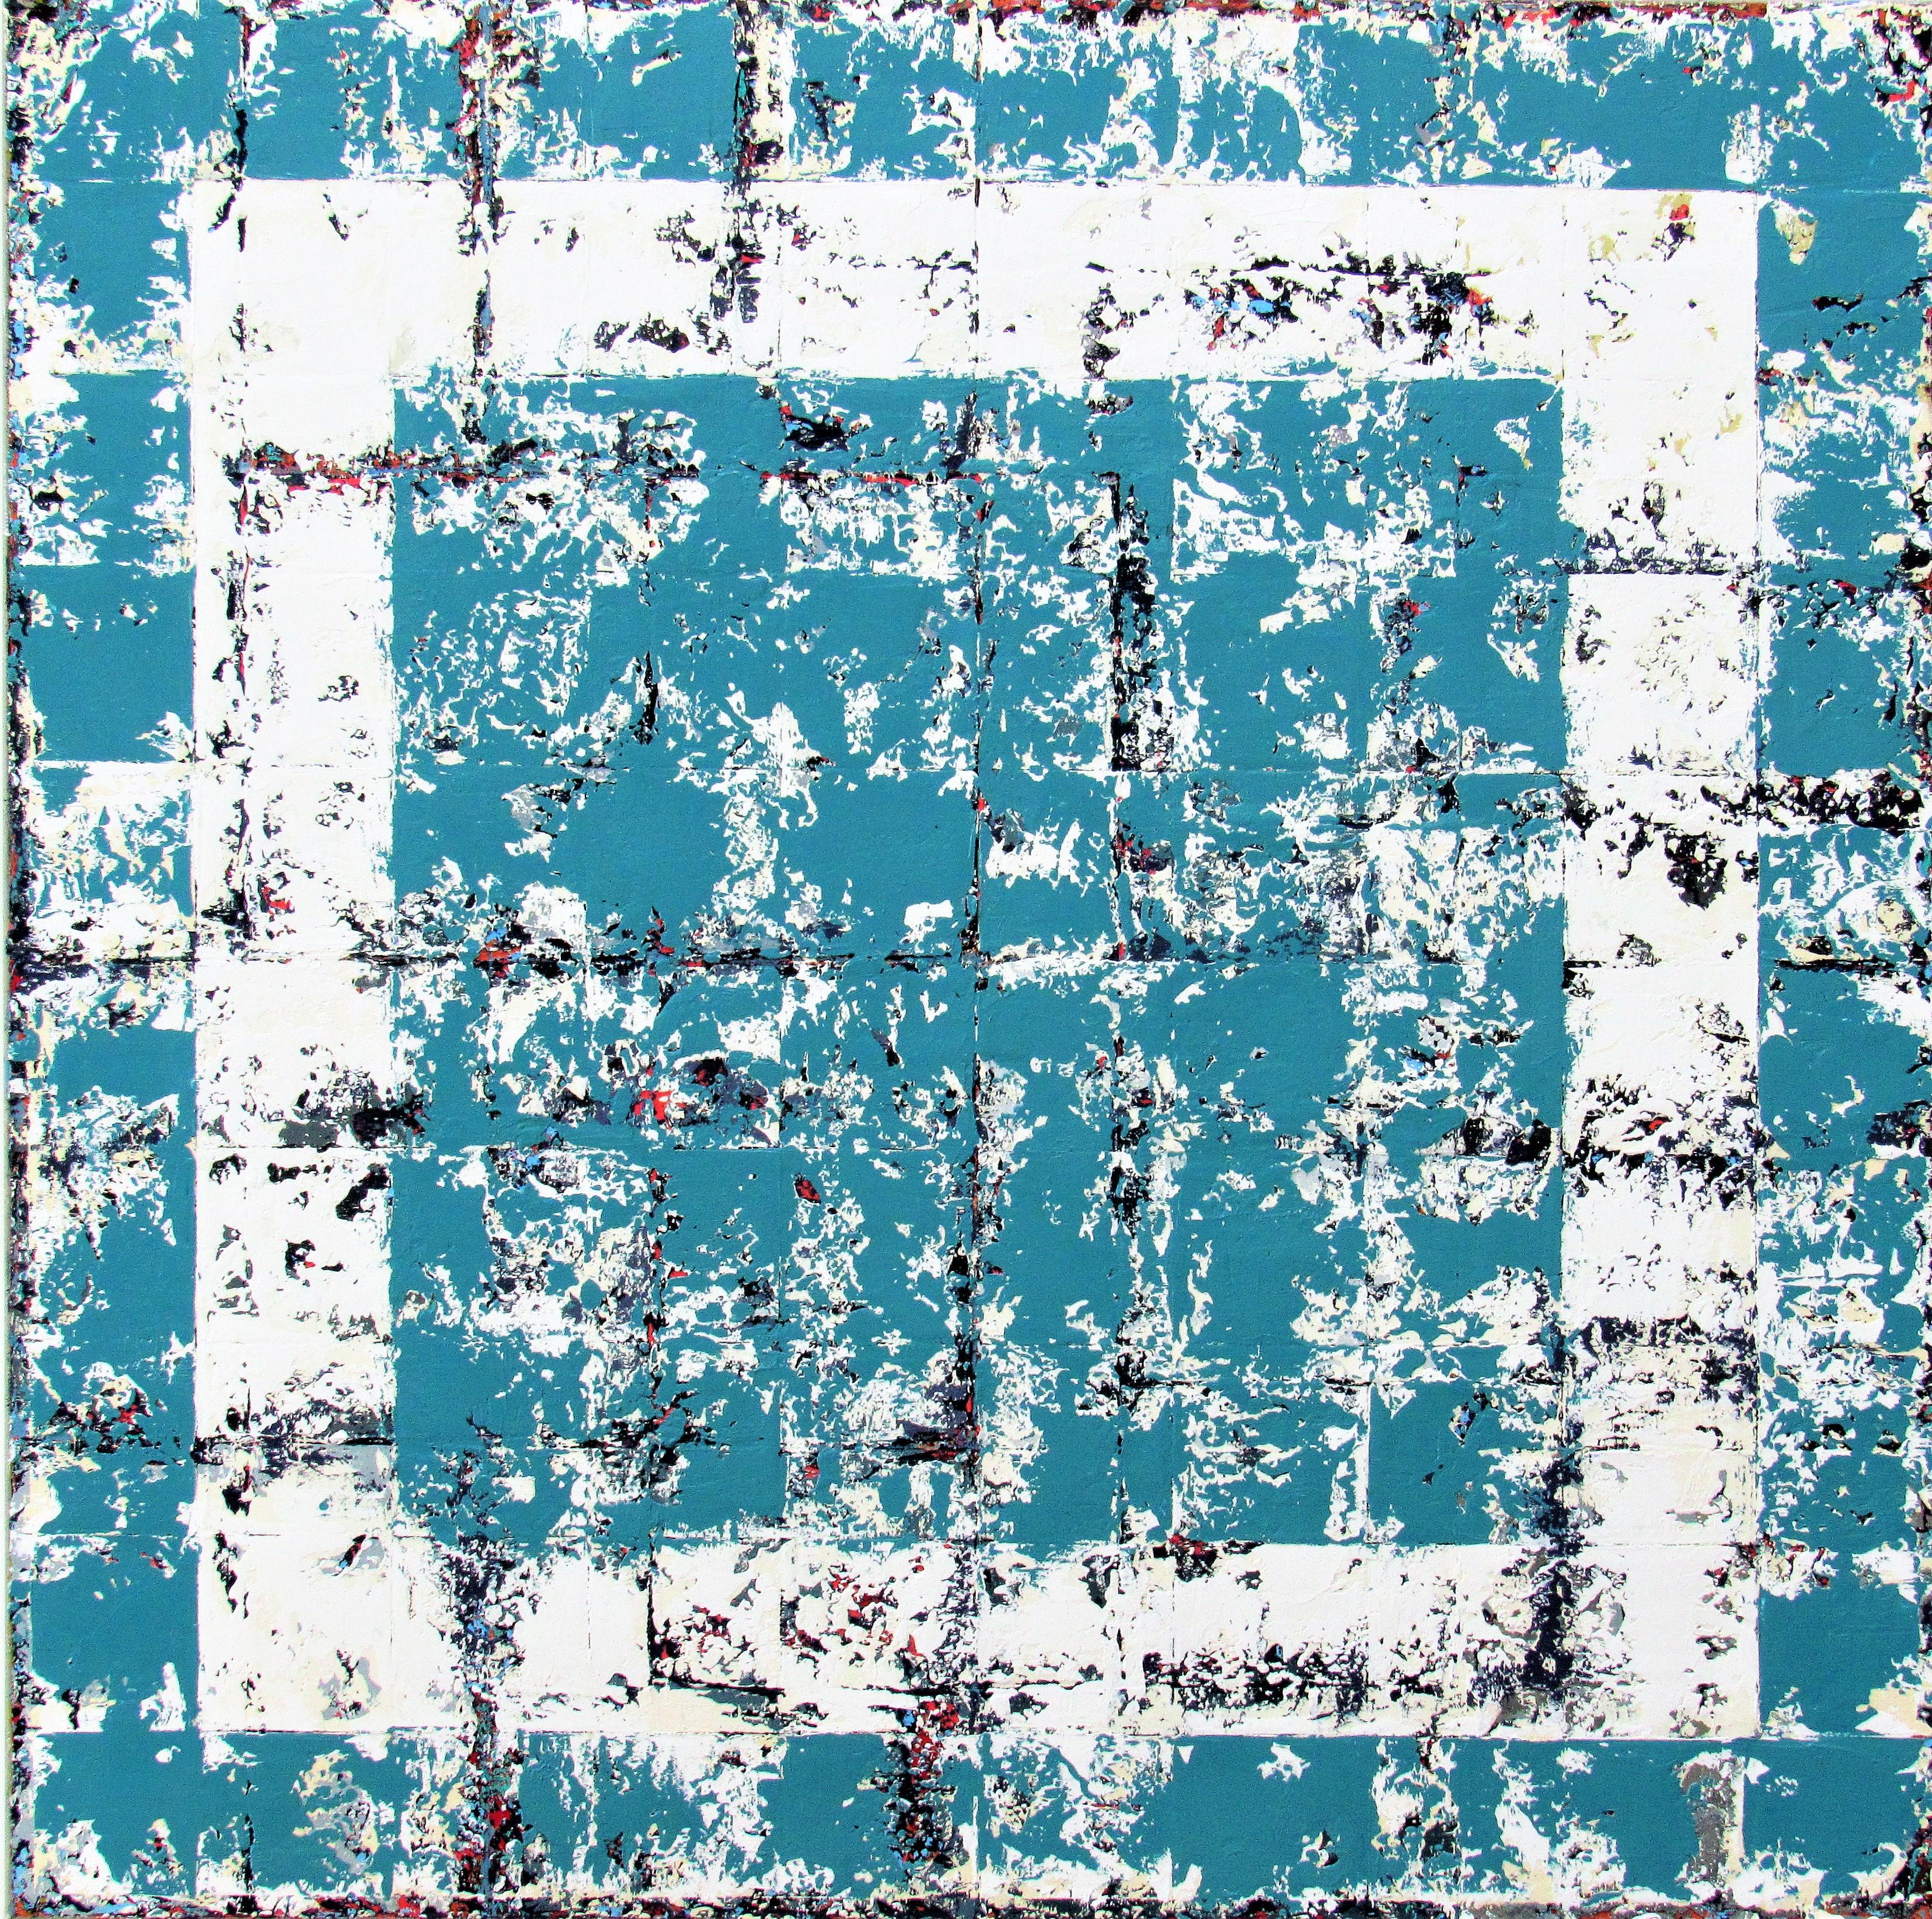 Glimpse - contemporary turquoise white abstract geometric oil painting on canvas - Painting by Brian Neish